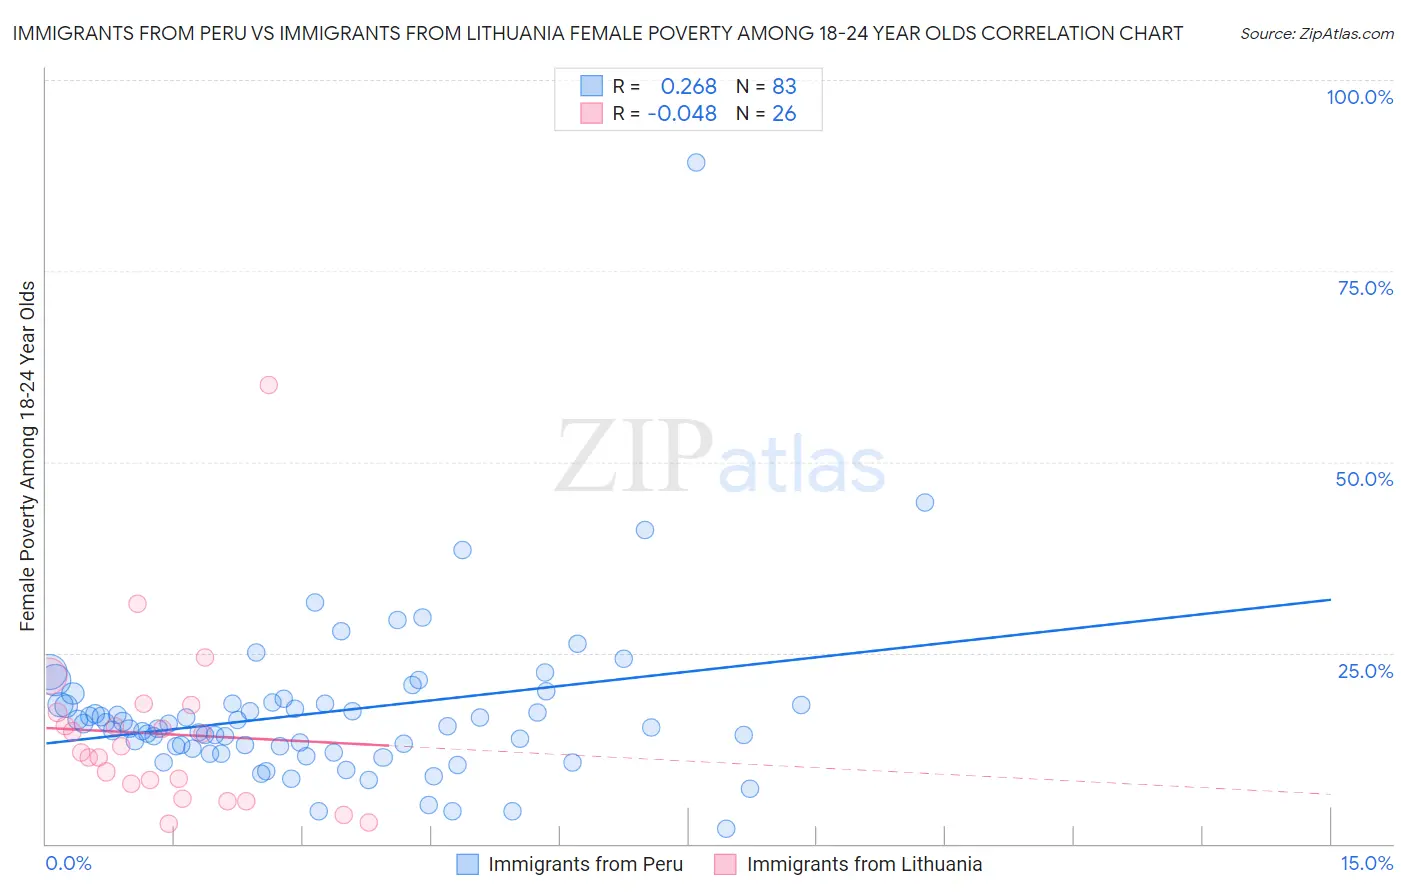 Immigrants from Peru vs Immigrants from Lithuania Female Poverty Among 18-24 Year Olds